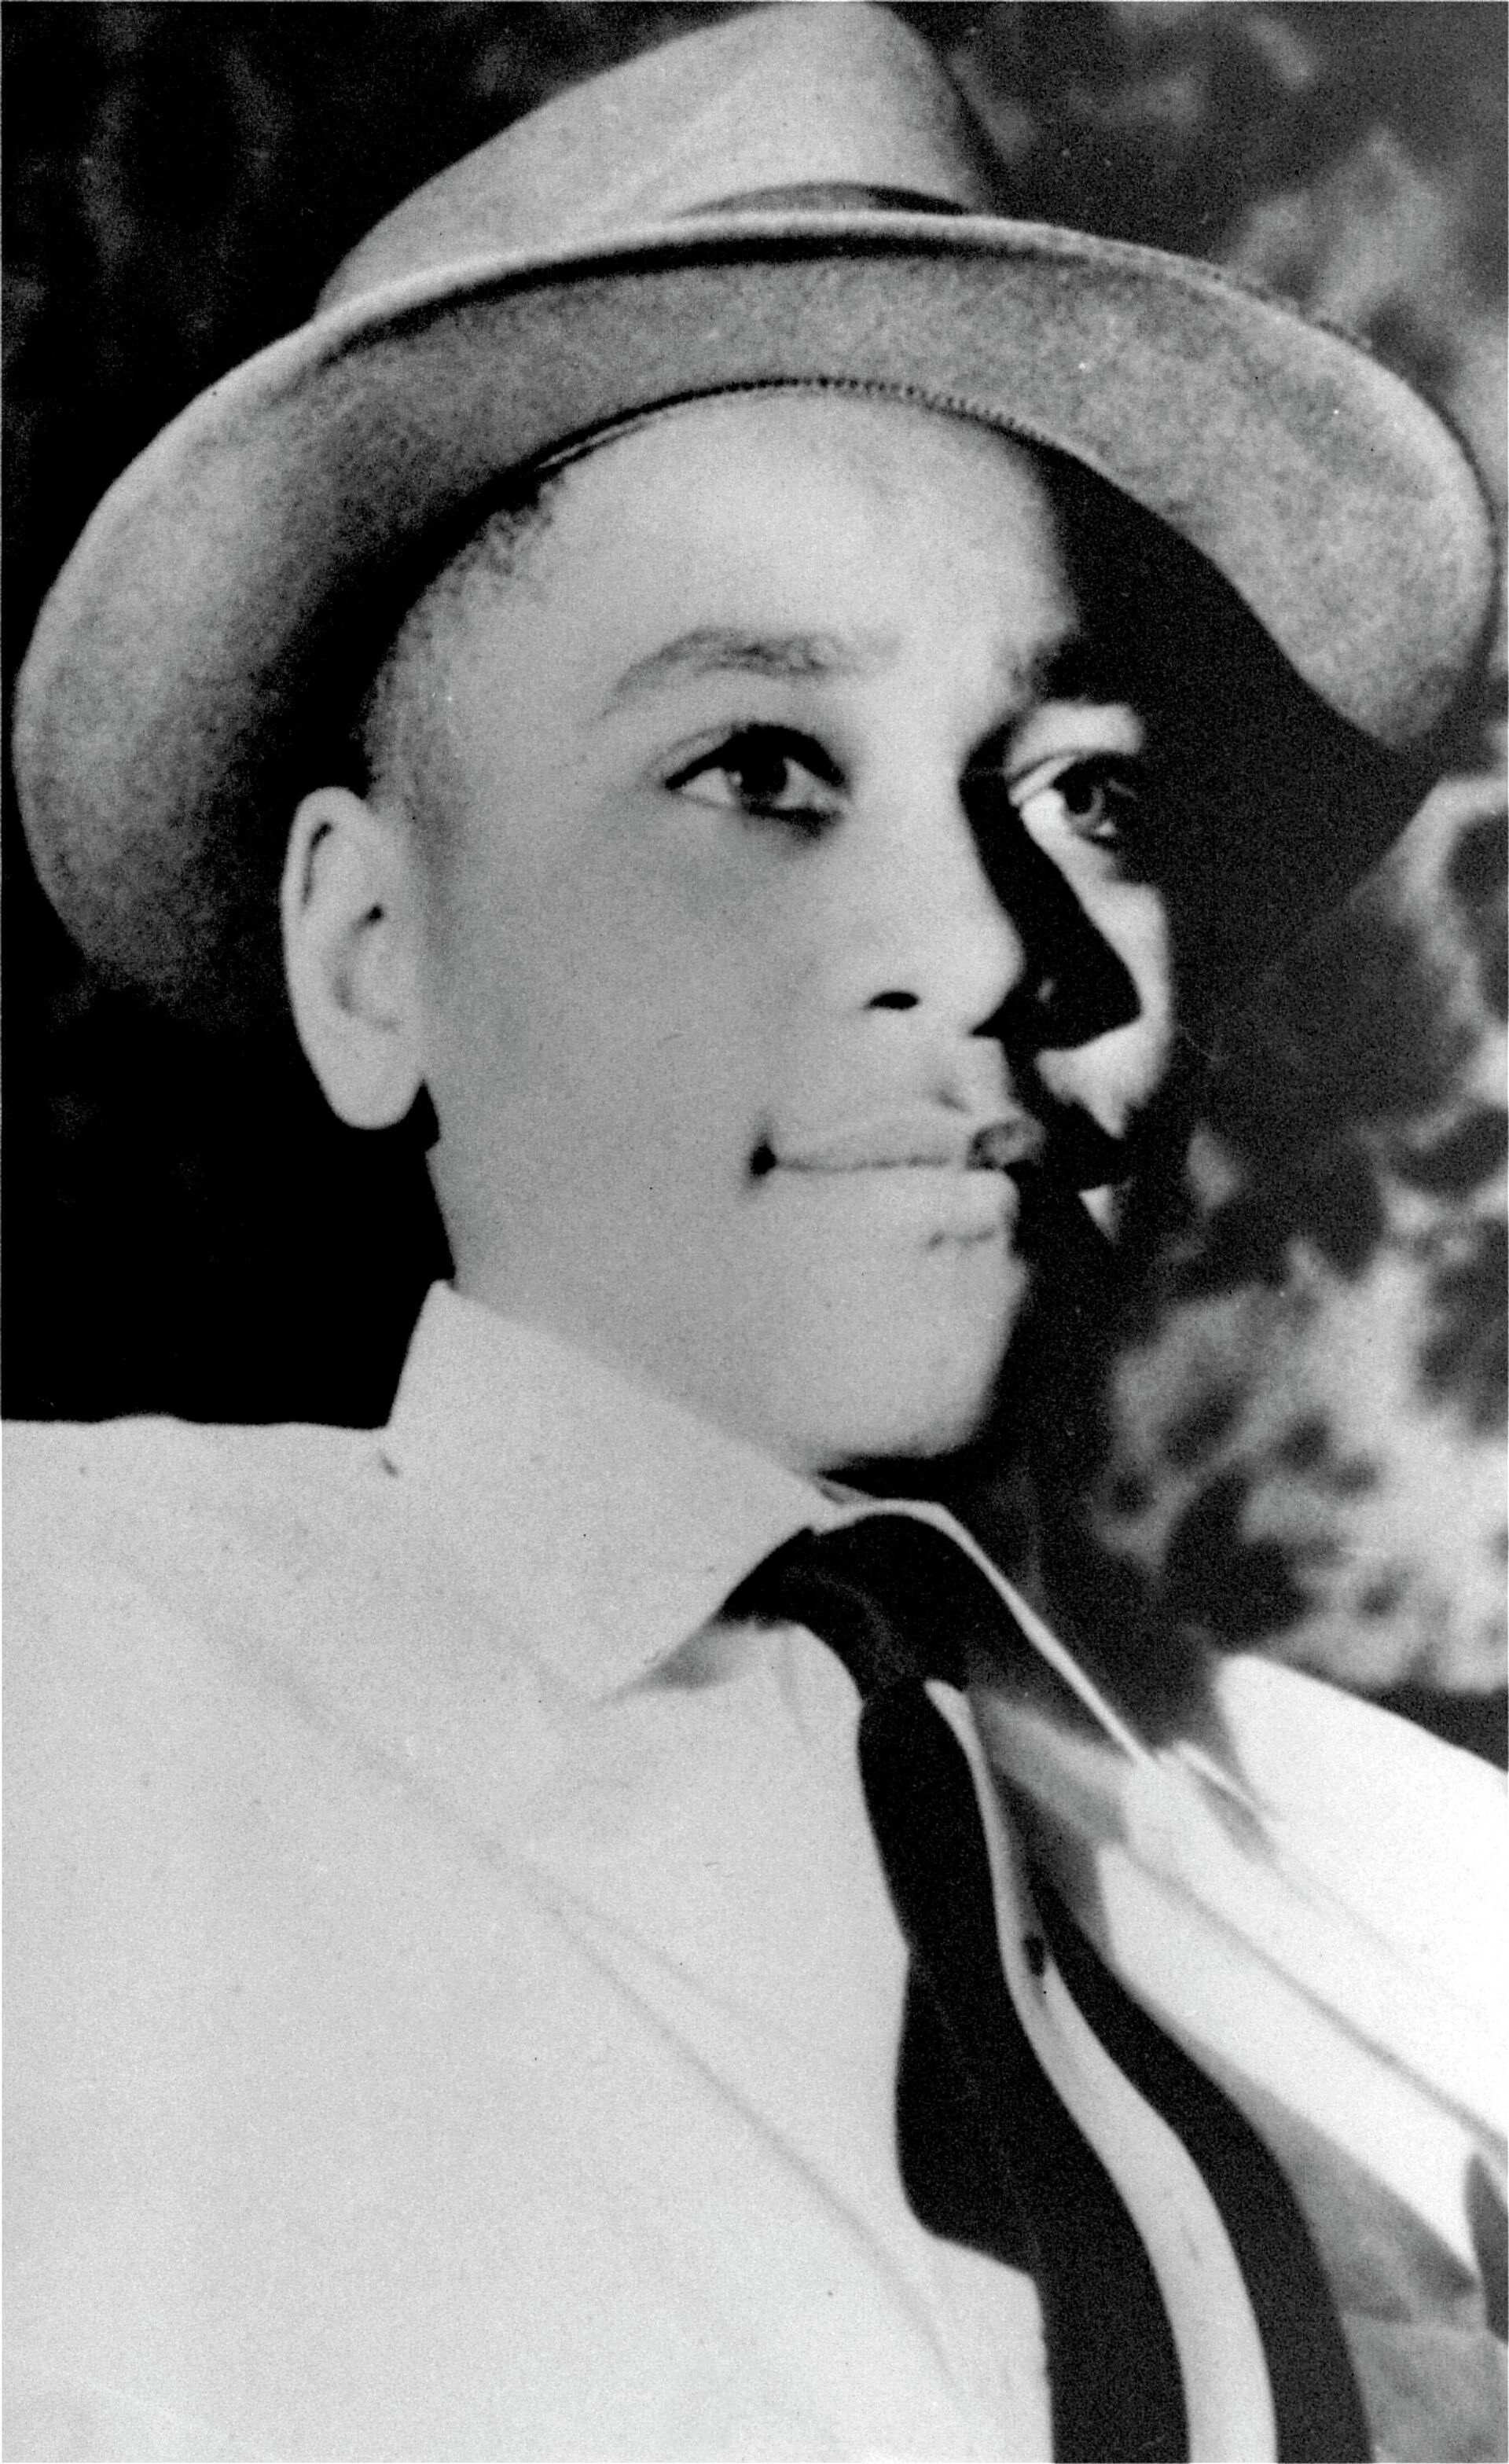 FILE - An undated portrait of Emmett Louis Till, a black 14 year old Chicago boy, whose weighted down body was found in the Tallahatchie River near the Delta community of Money, Mississippi, August 31, 1955. Local residents Roy Bryant, 24, and J.W. Milam, 35, were accused of kidnapping, torturing and murdering Till for allegedly whistling at Bryant's wife. A team searching the basement of a Mississippi courthouse for evidence about the lynching of Black teenager Emmett Till has found the unserved warrant in June 2022 charging a white woman in his kidnapping in 1955, and relatives of the victim want authorities to finally arrest her nearly 70 years later. - Sputnik International, 1920, 29.06.2022